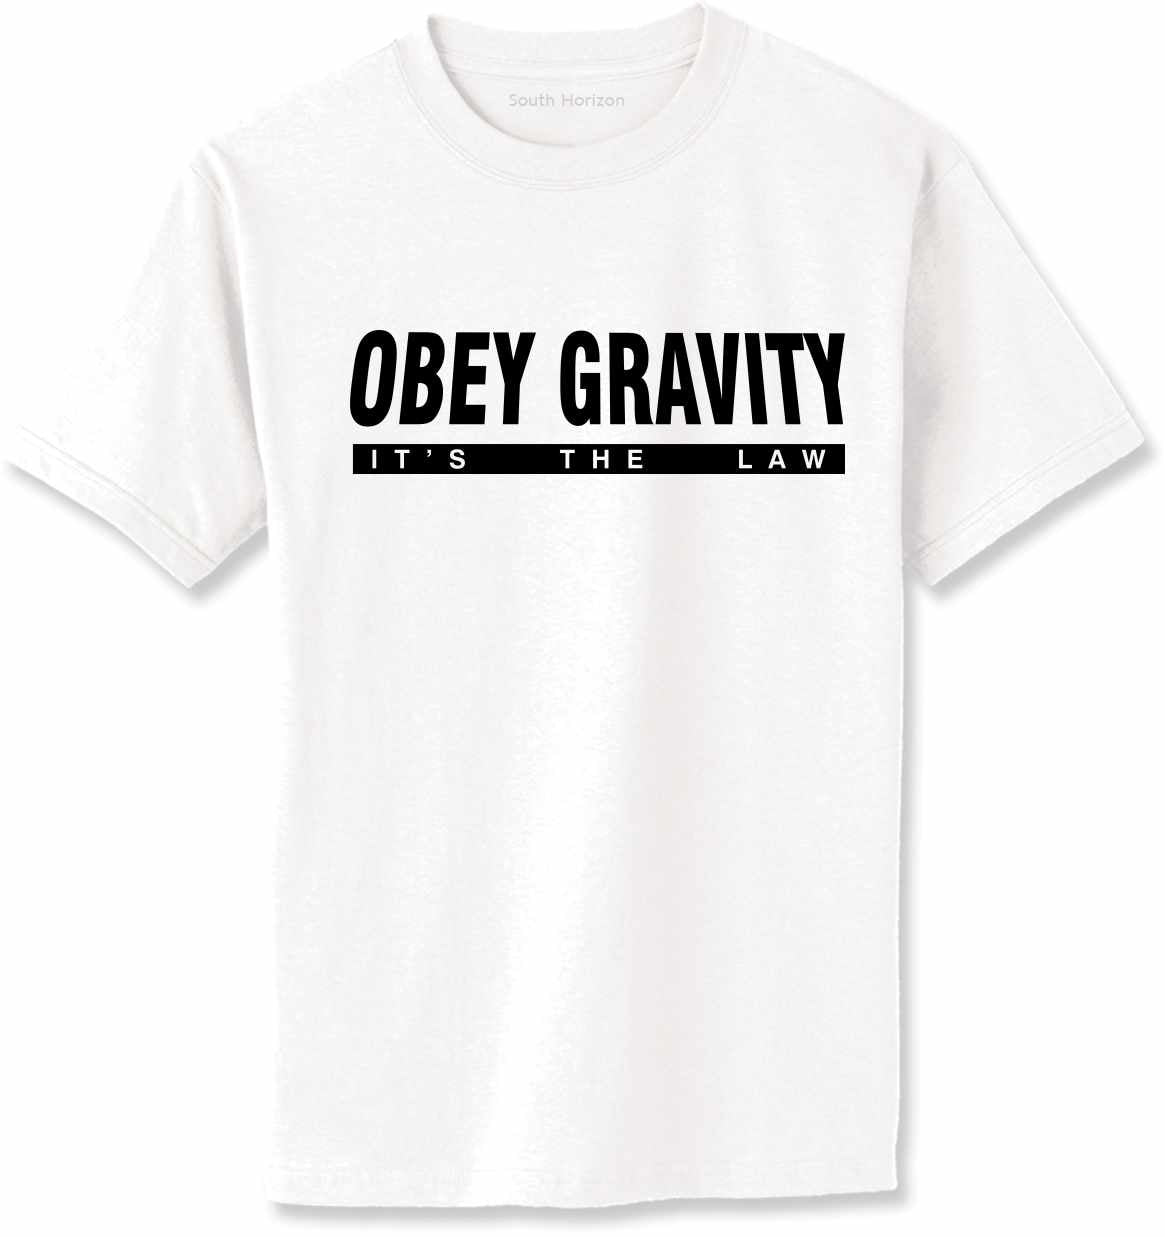 OBEY GRAVITY, It's the Law Adult T-Shirt (#756-1)